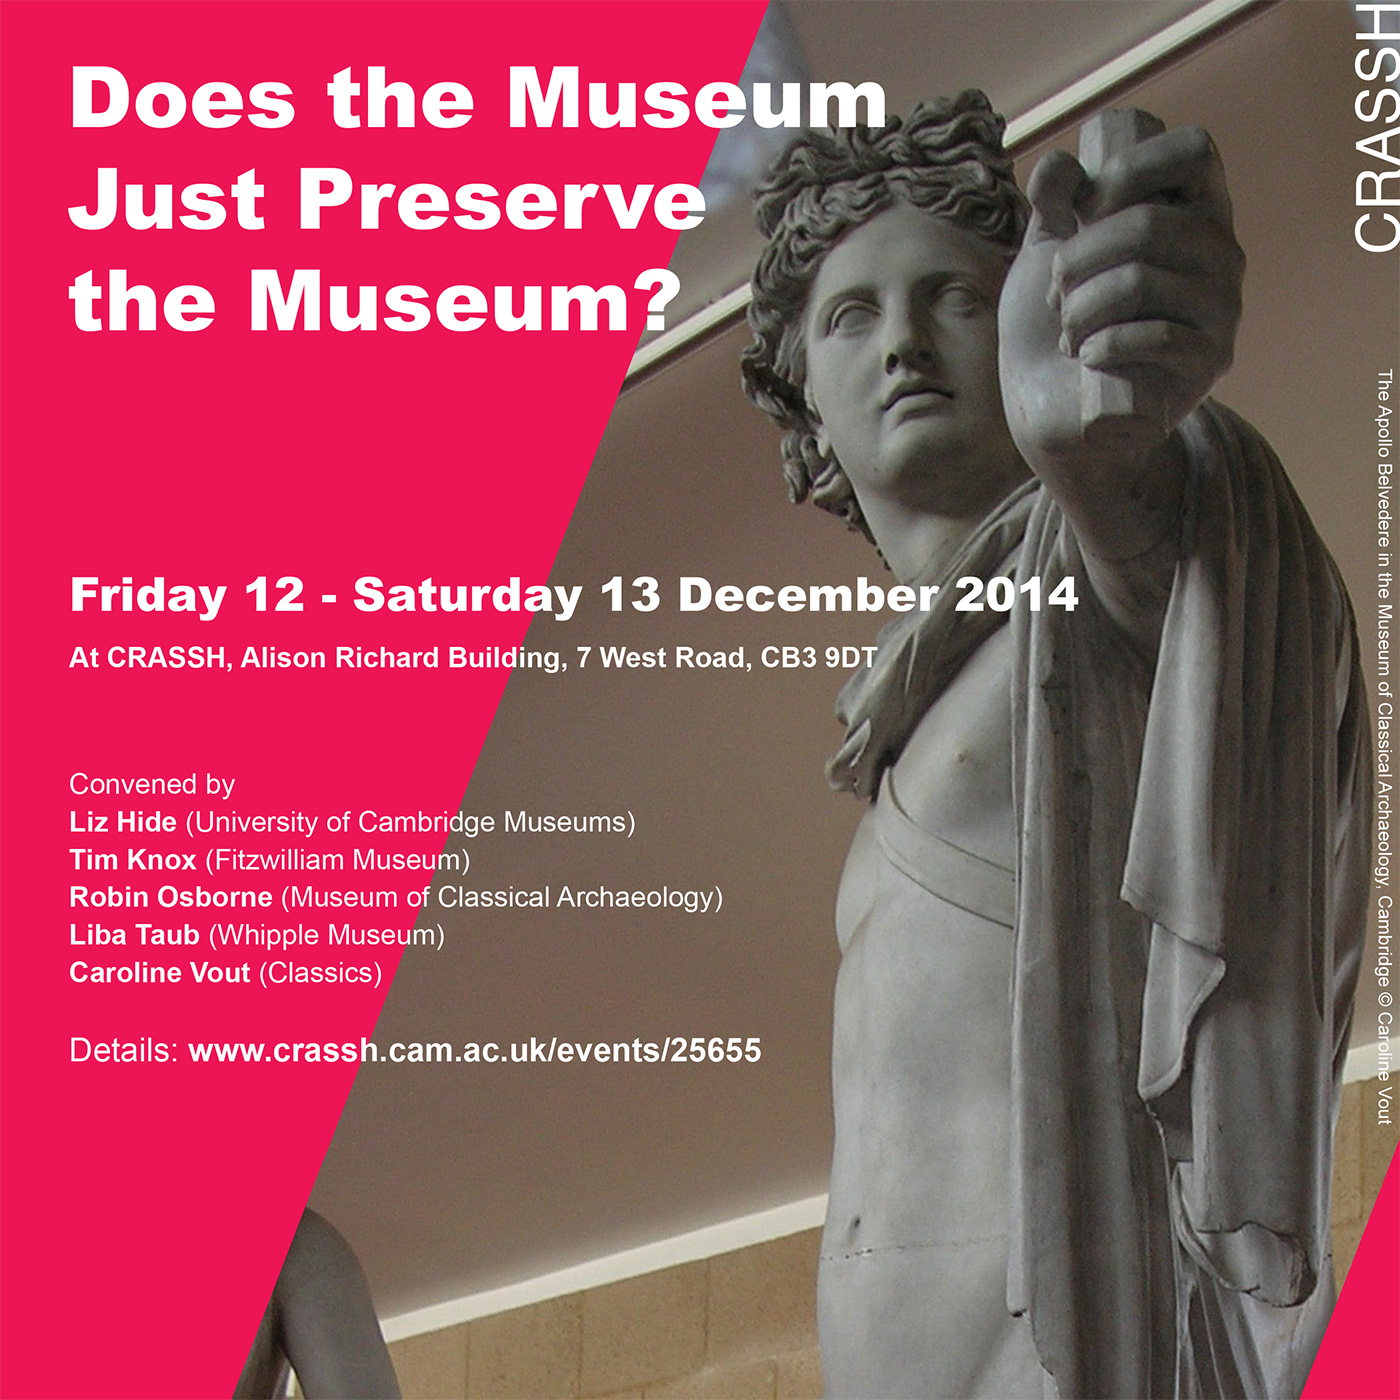 Does the Museum Just Preserve the Museum?'s image